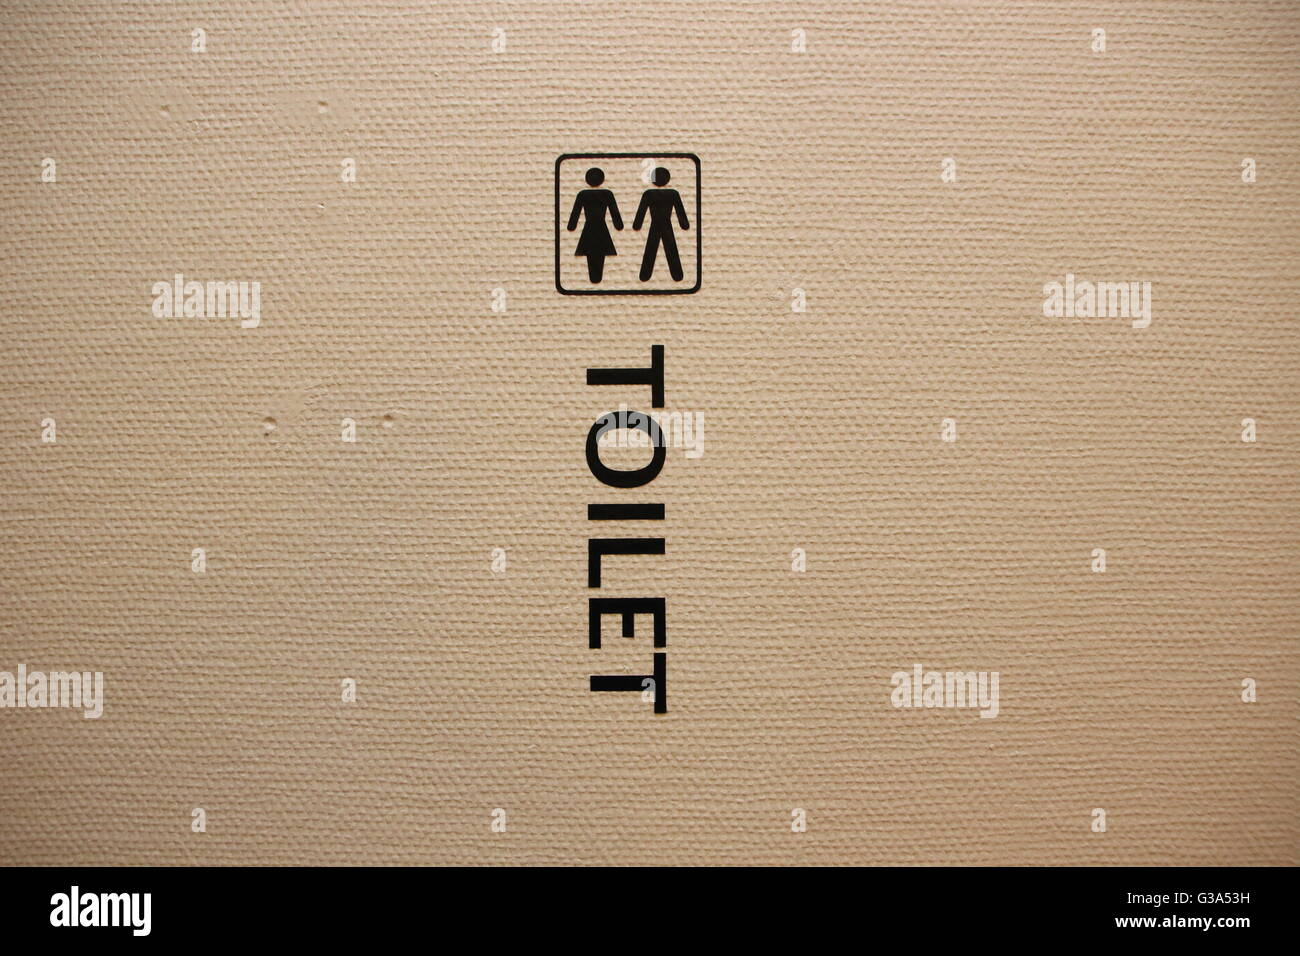 Man and Woman Toilet Sign on White Structured Wall Stock Photo